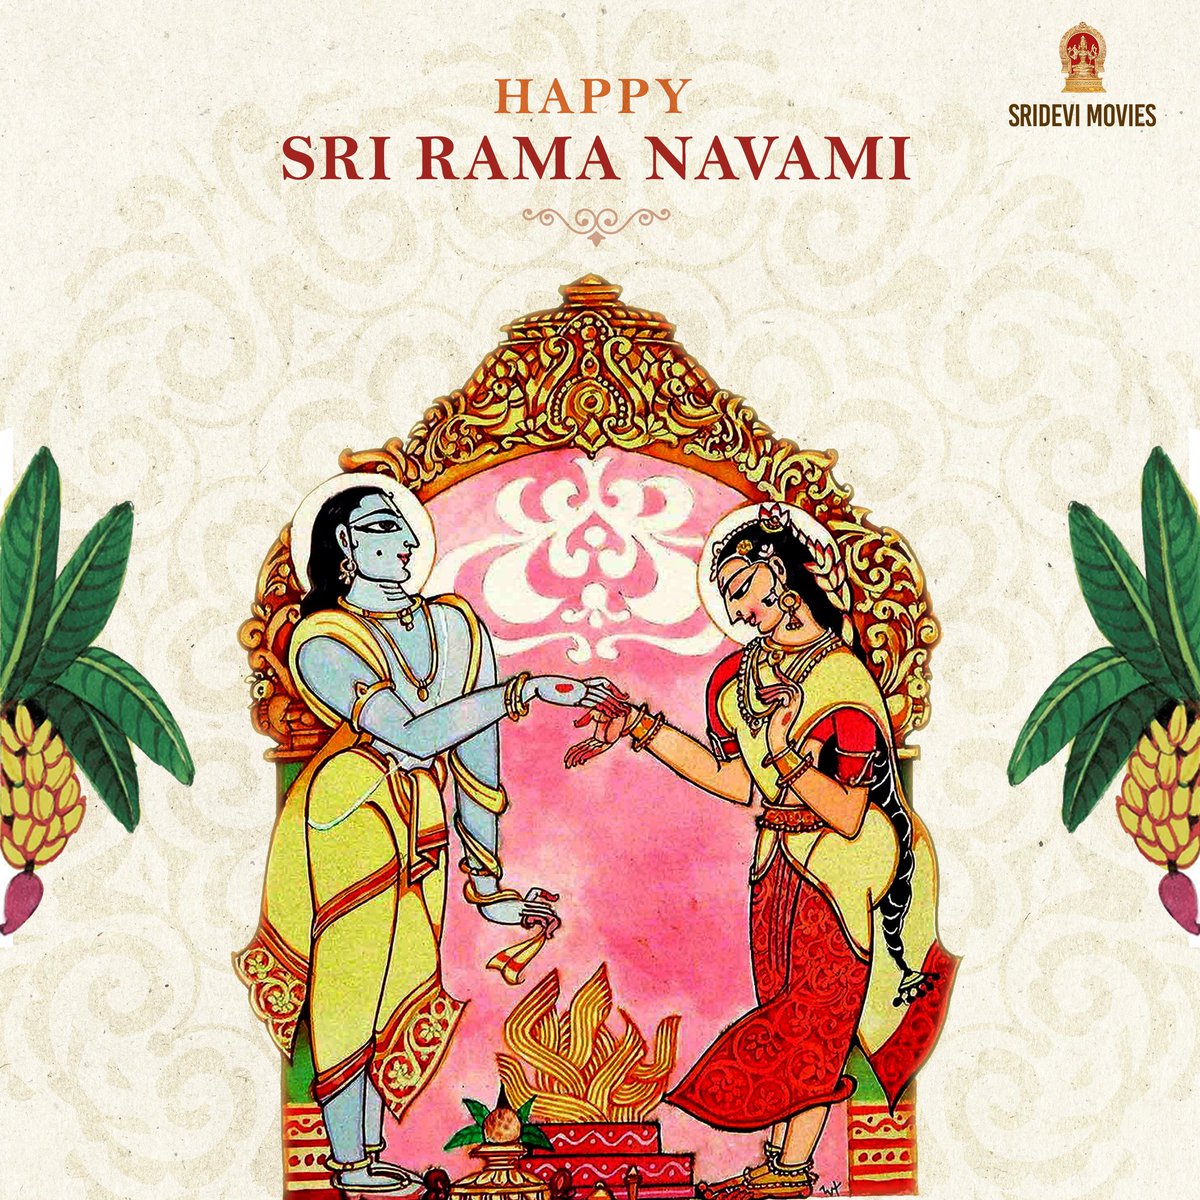 May the divine presence of Lord Rama guide you through all the challenges of life ✨🙏 #HappyRamNavami 🏹